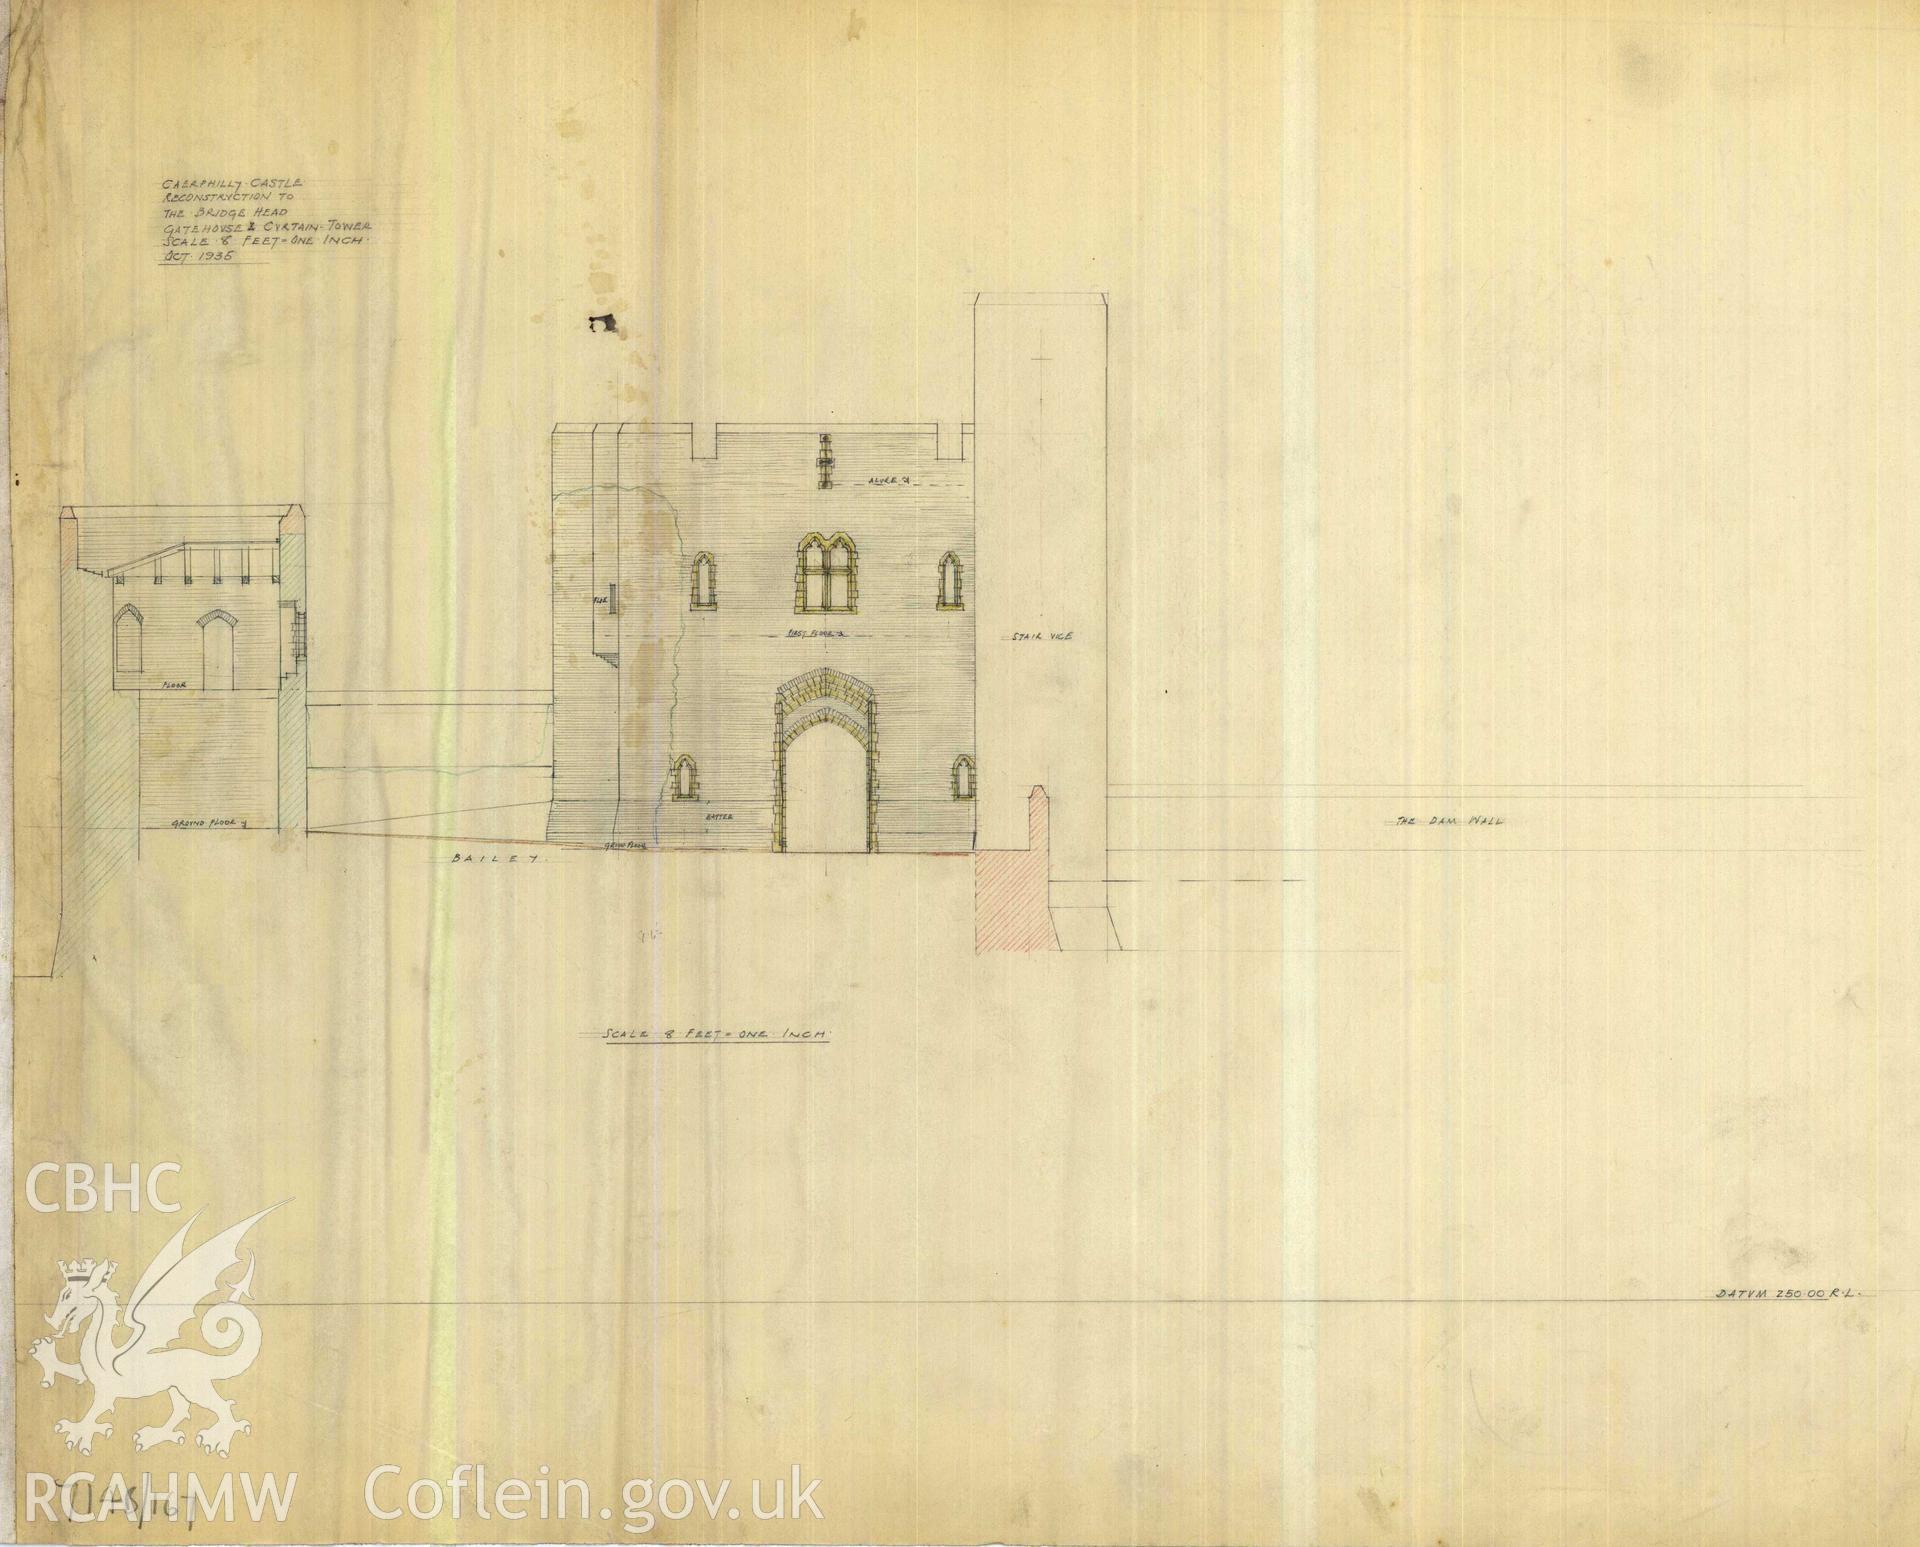 Cadw guardianship monument drawing of Caerphilly Castle. Dam, S gate, sect+gate E elev. Cadw Ref. No:714B/167. Scale 1:96.